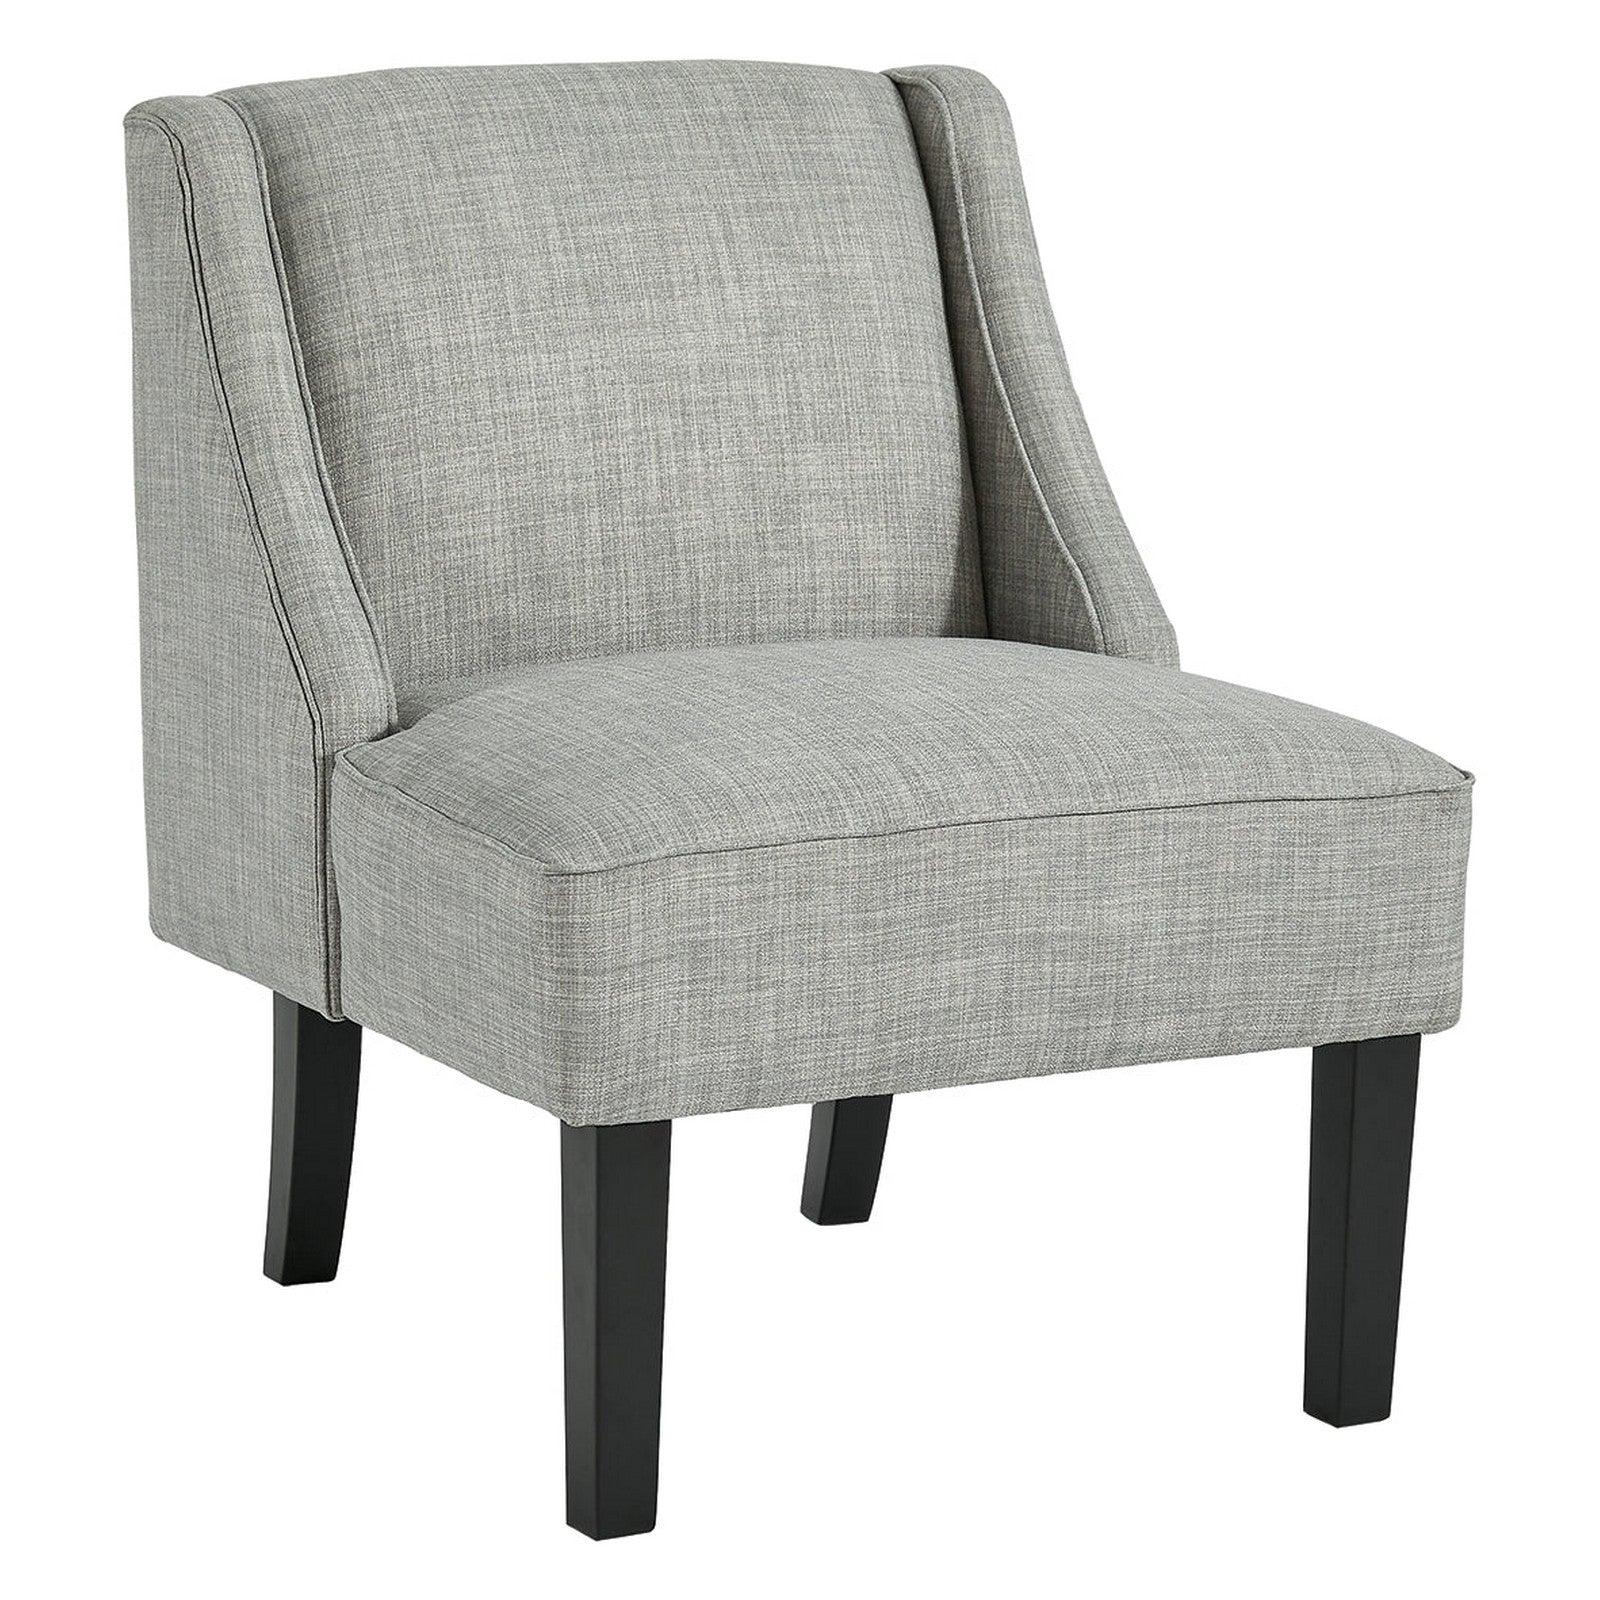 Janesley Accent Chair Ash-A3000138